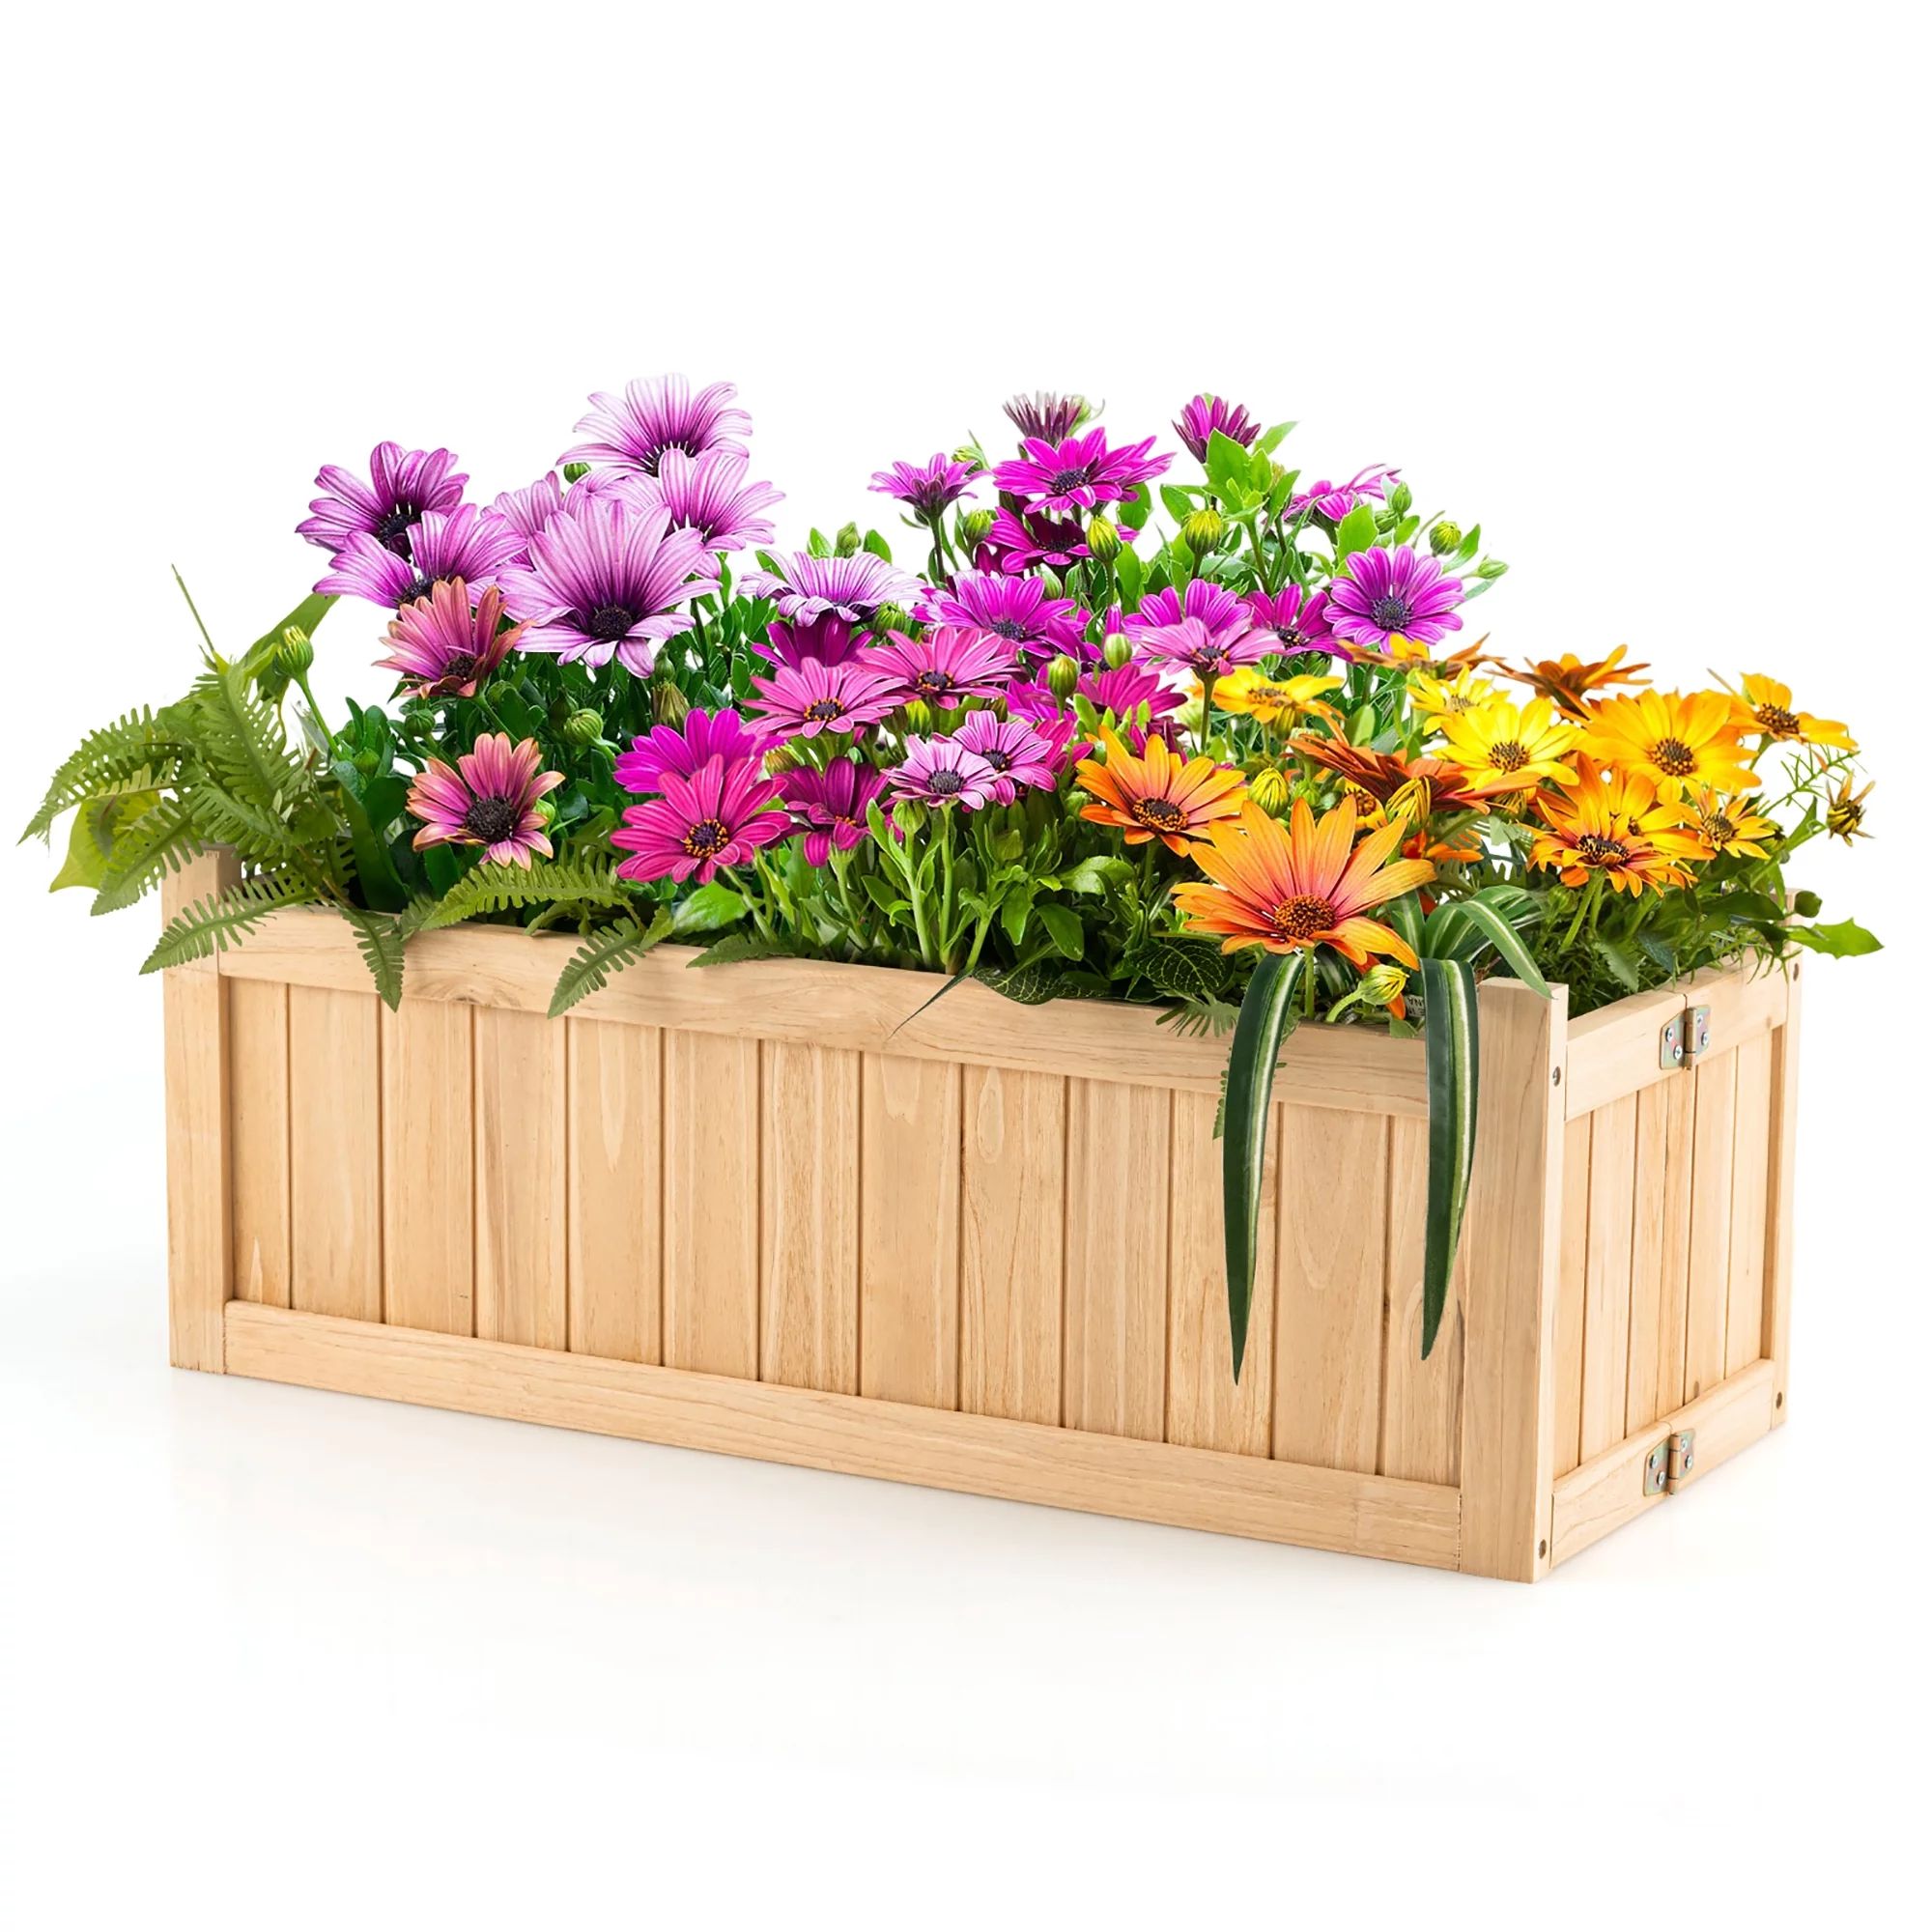 Costway Outdoor Wooden Planter Box Folding Raised Garden Plant Container w/Drainage Hole | Walmart (US)